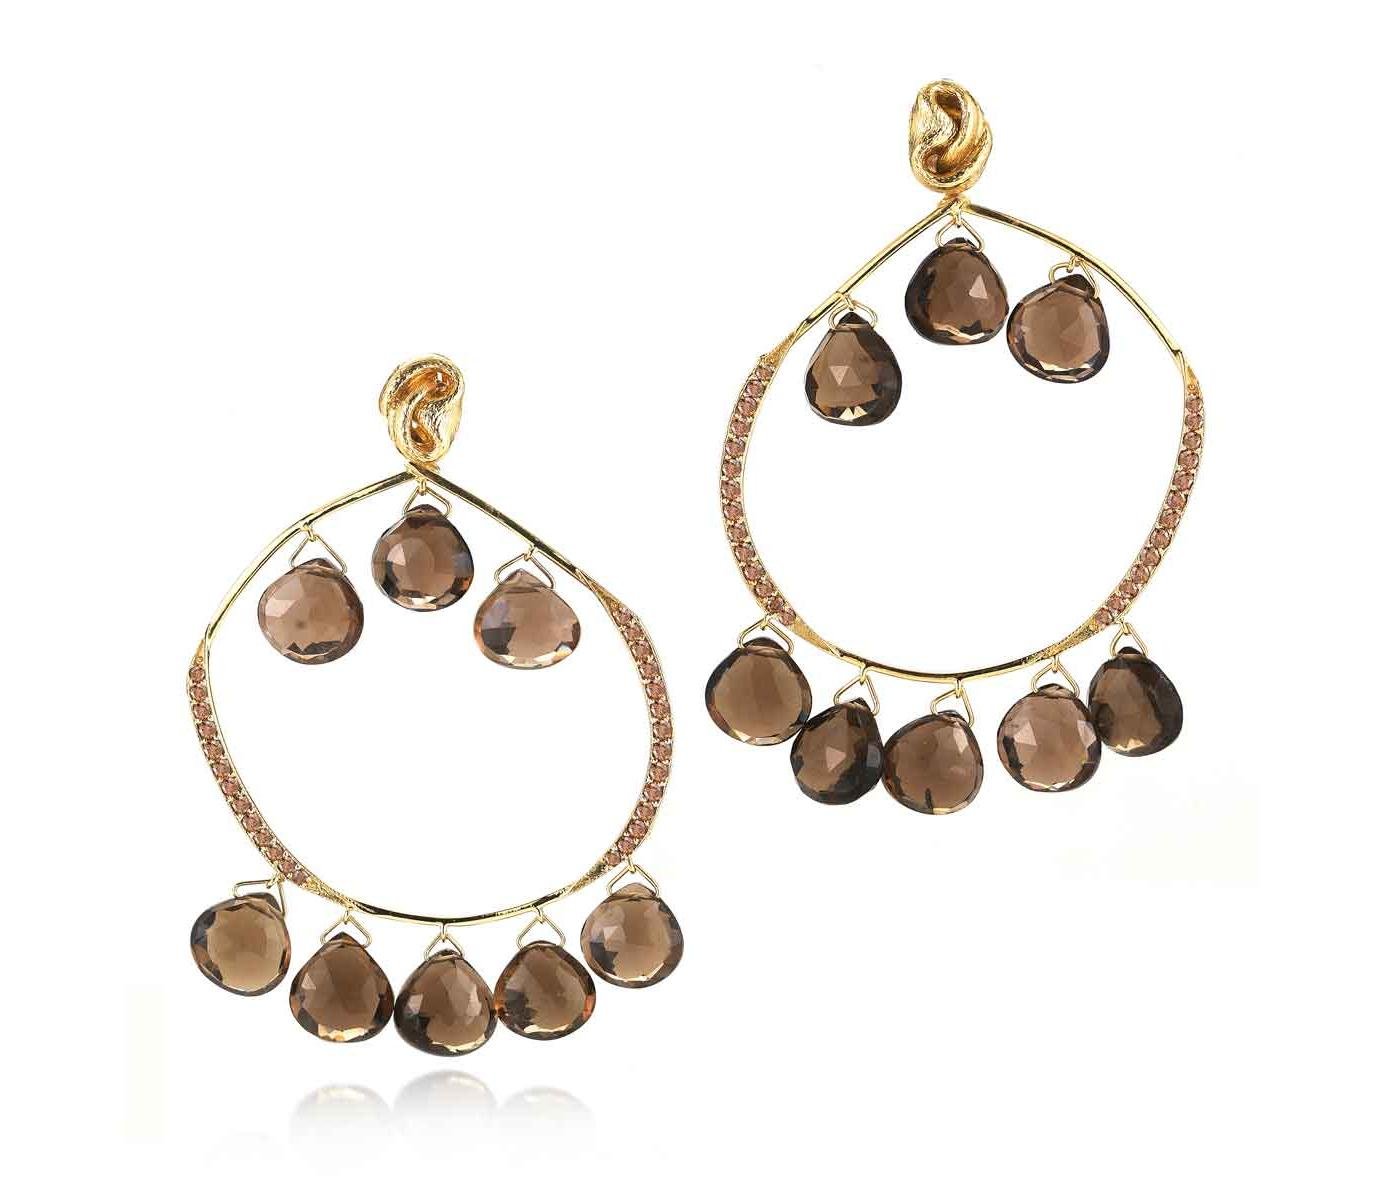 Earrings by Mary Esses